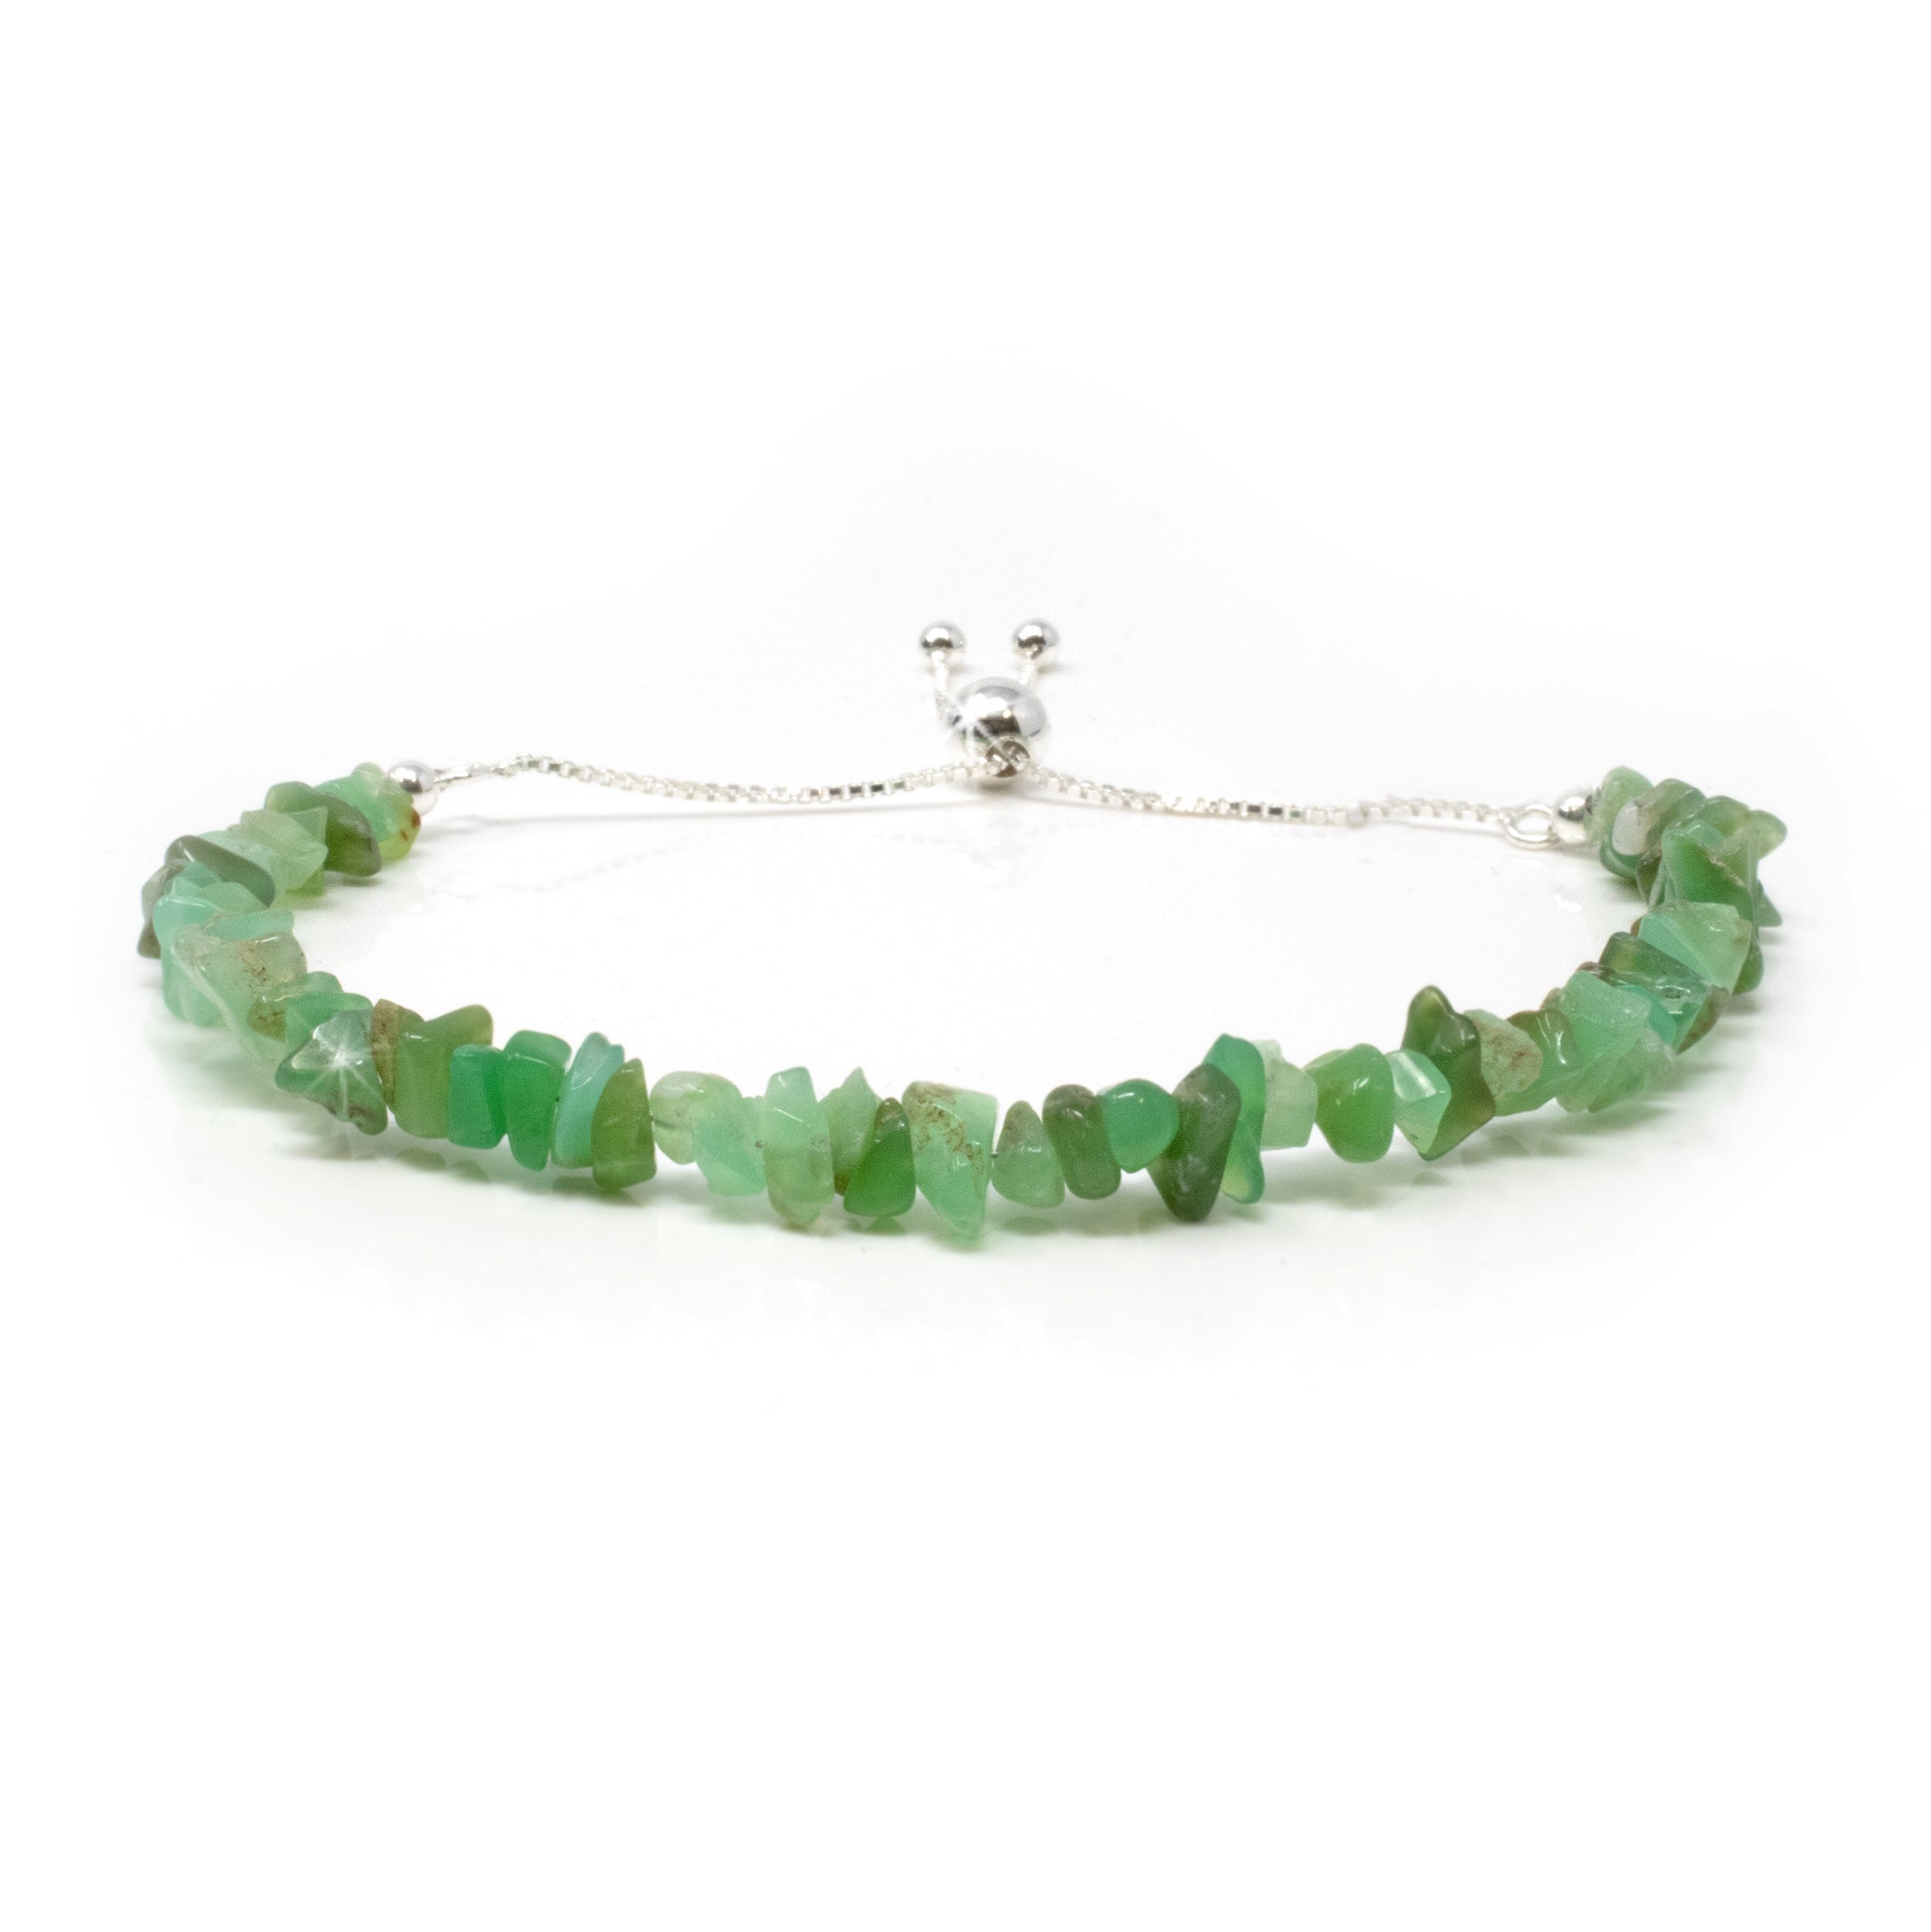 Chrysoprase Chip Beaded Bracelet With 925 Sterling Silver Adjustable Ball & Chain